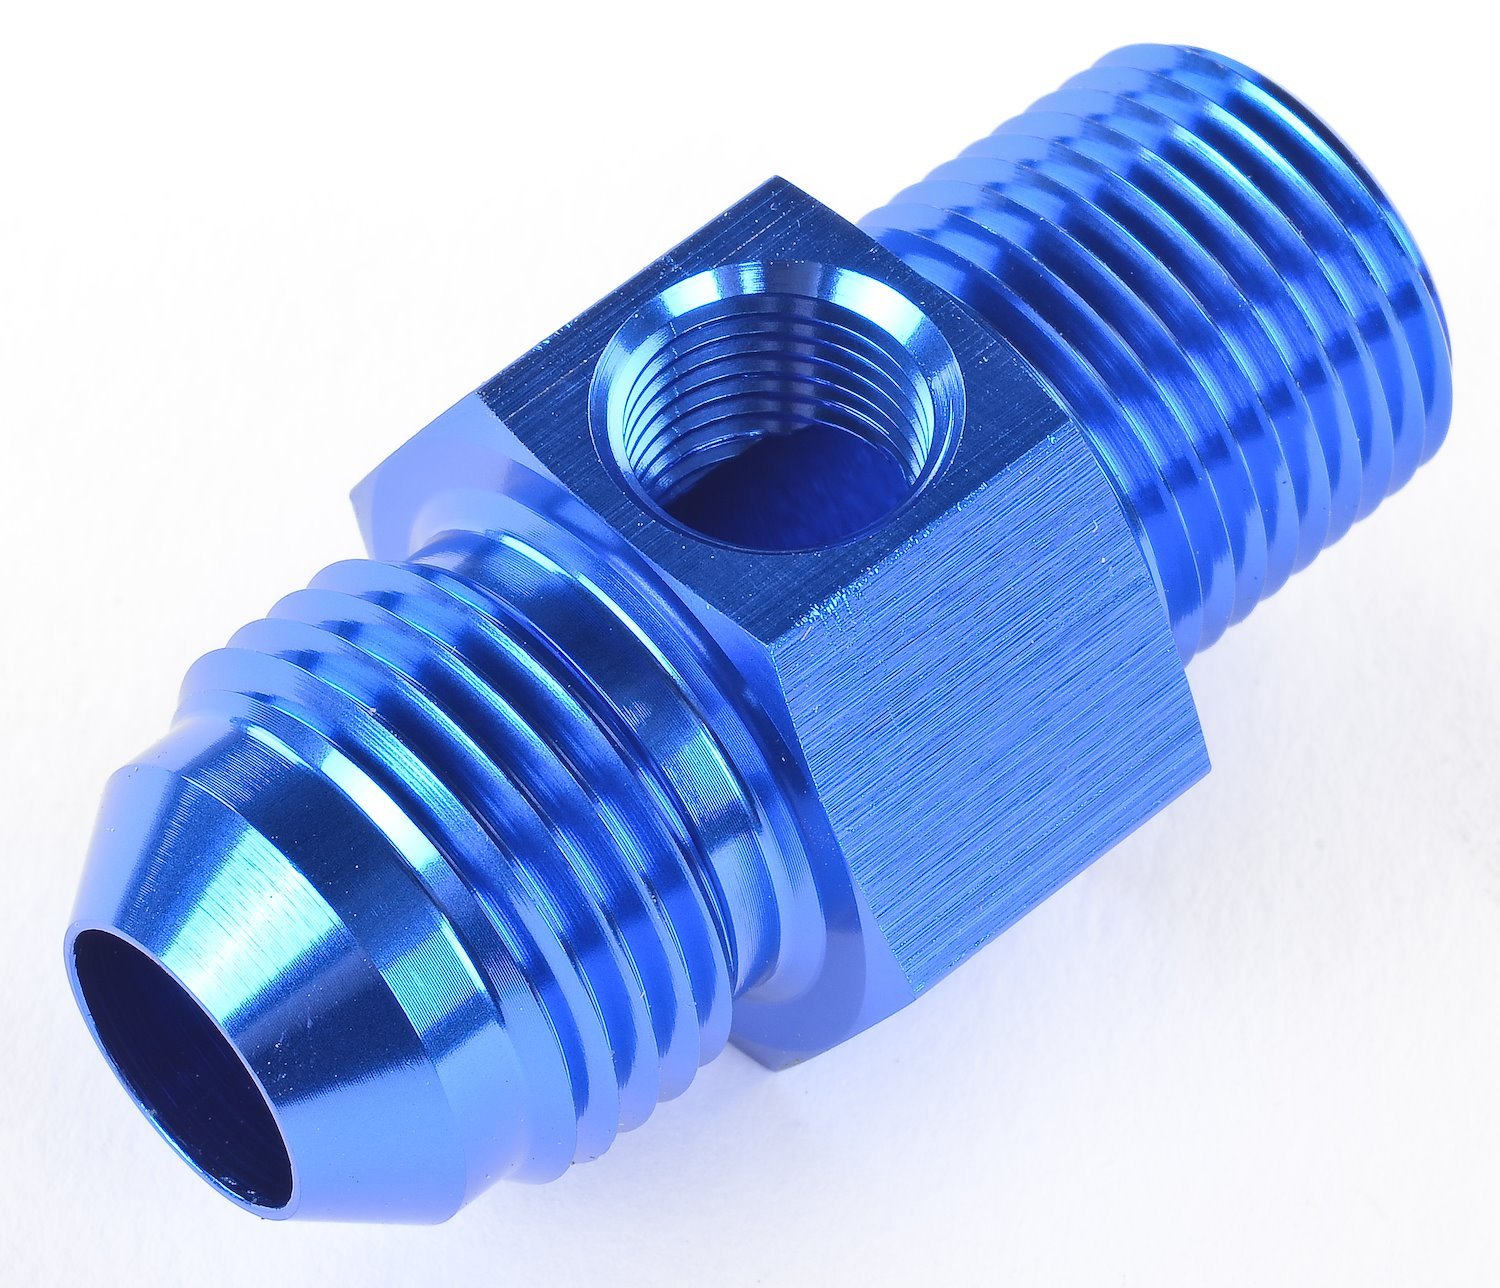 Fuel Pressure Adapter Fitting -8AN Male to 3/8" NPT